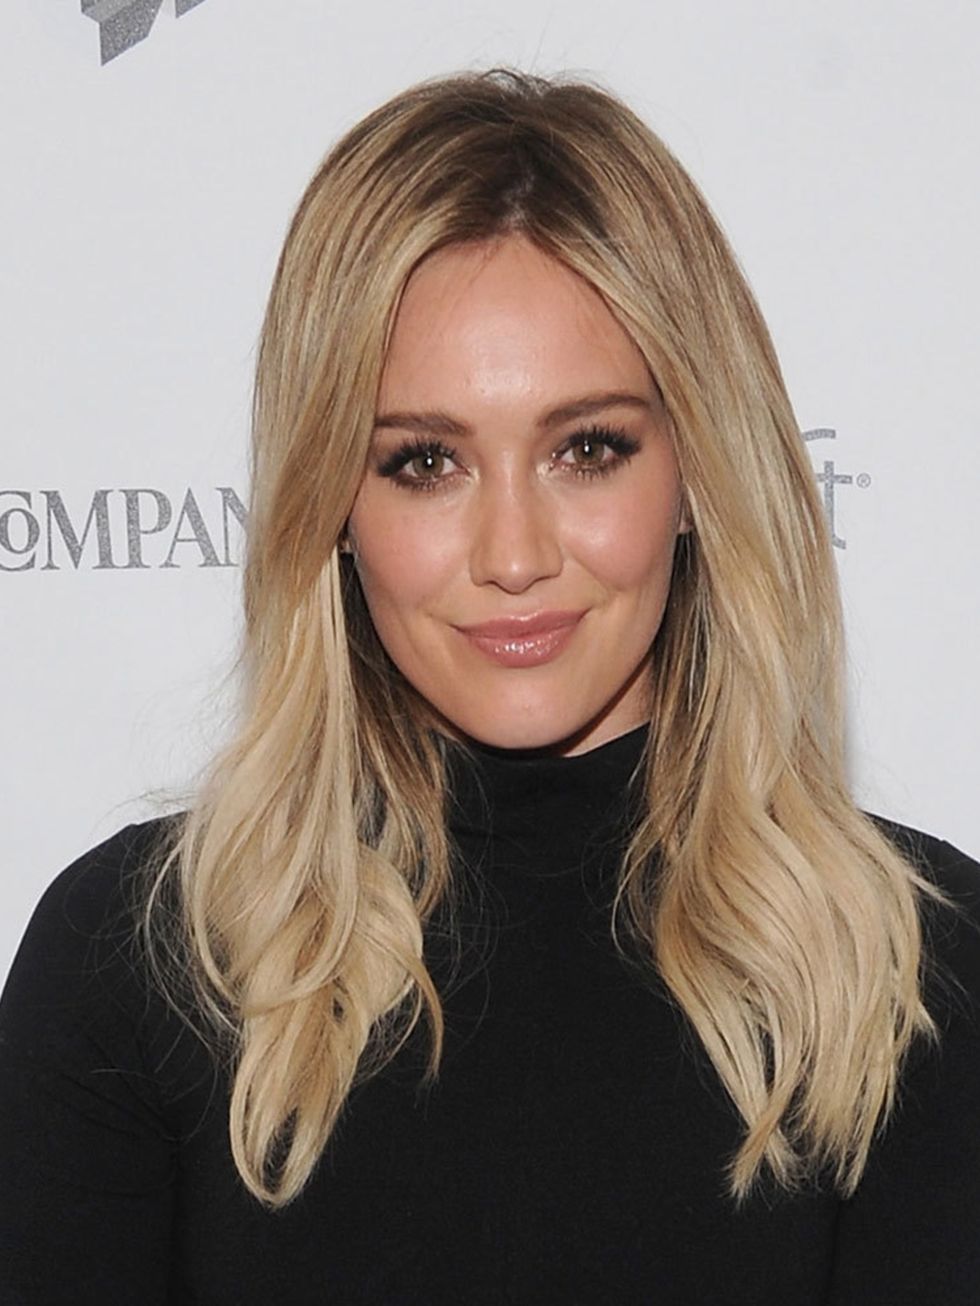 Hilary Duff doesn't look like this anymore...